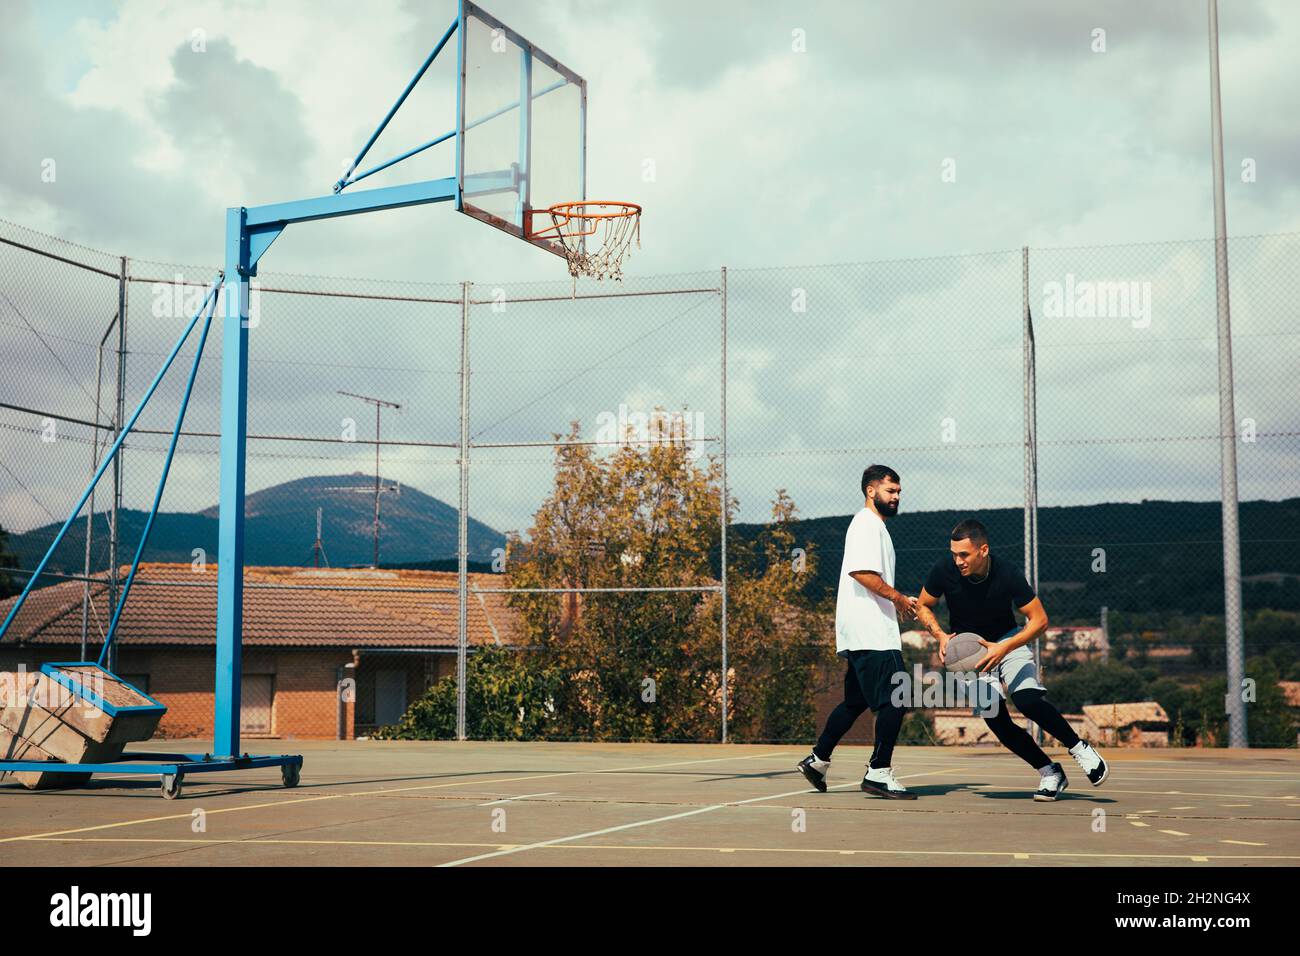 Man defending ball while playing basketball with friend at sports court Stock Photo